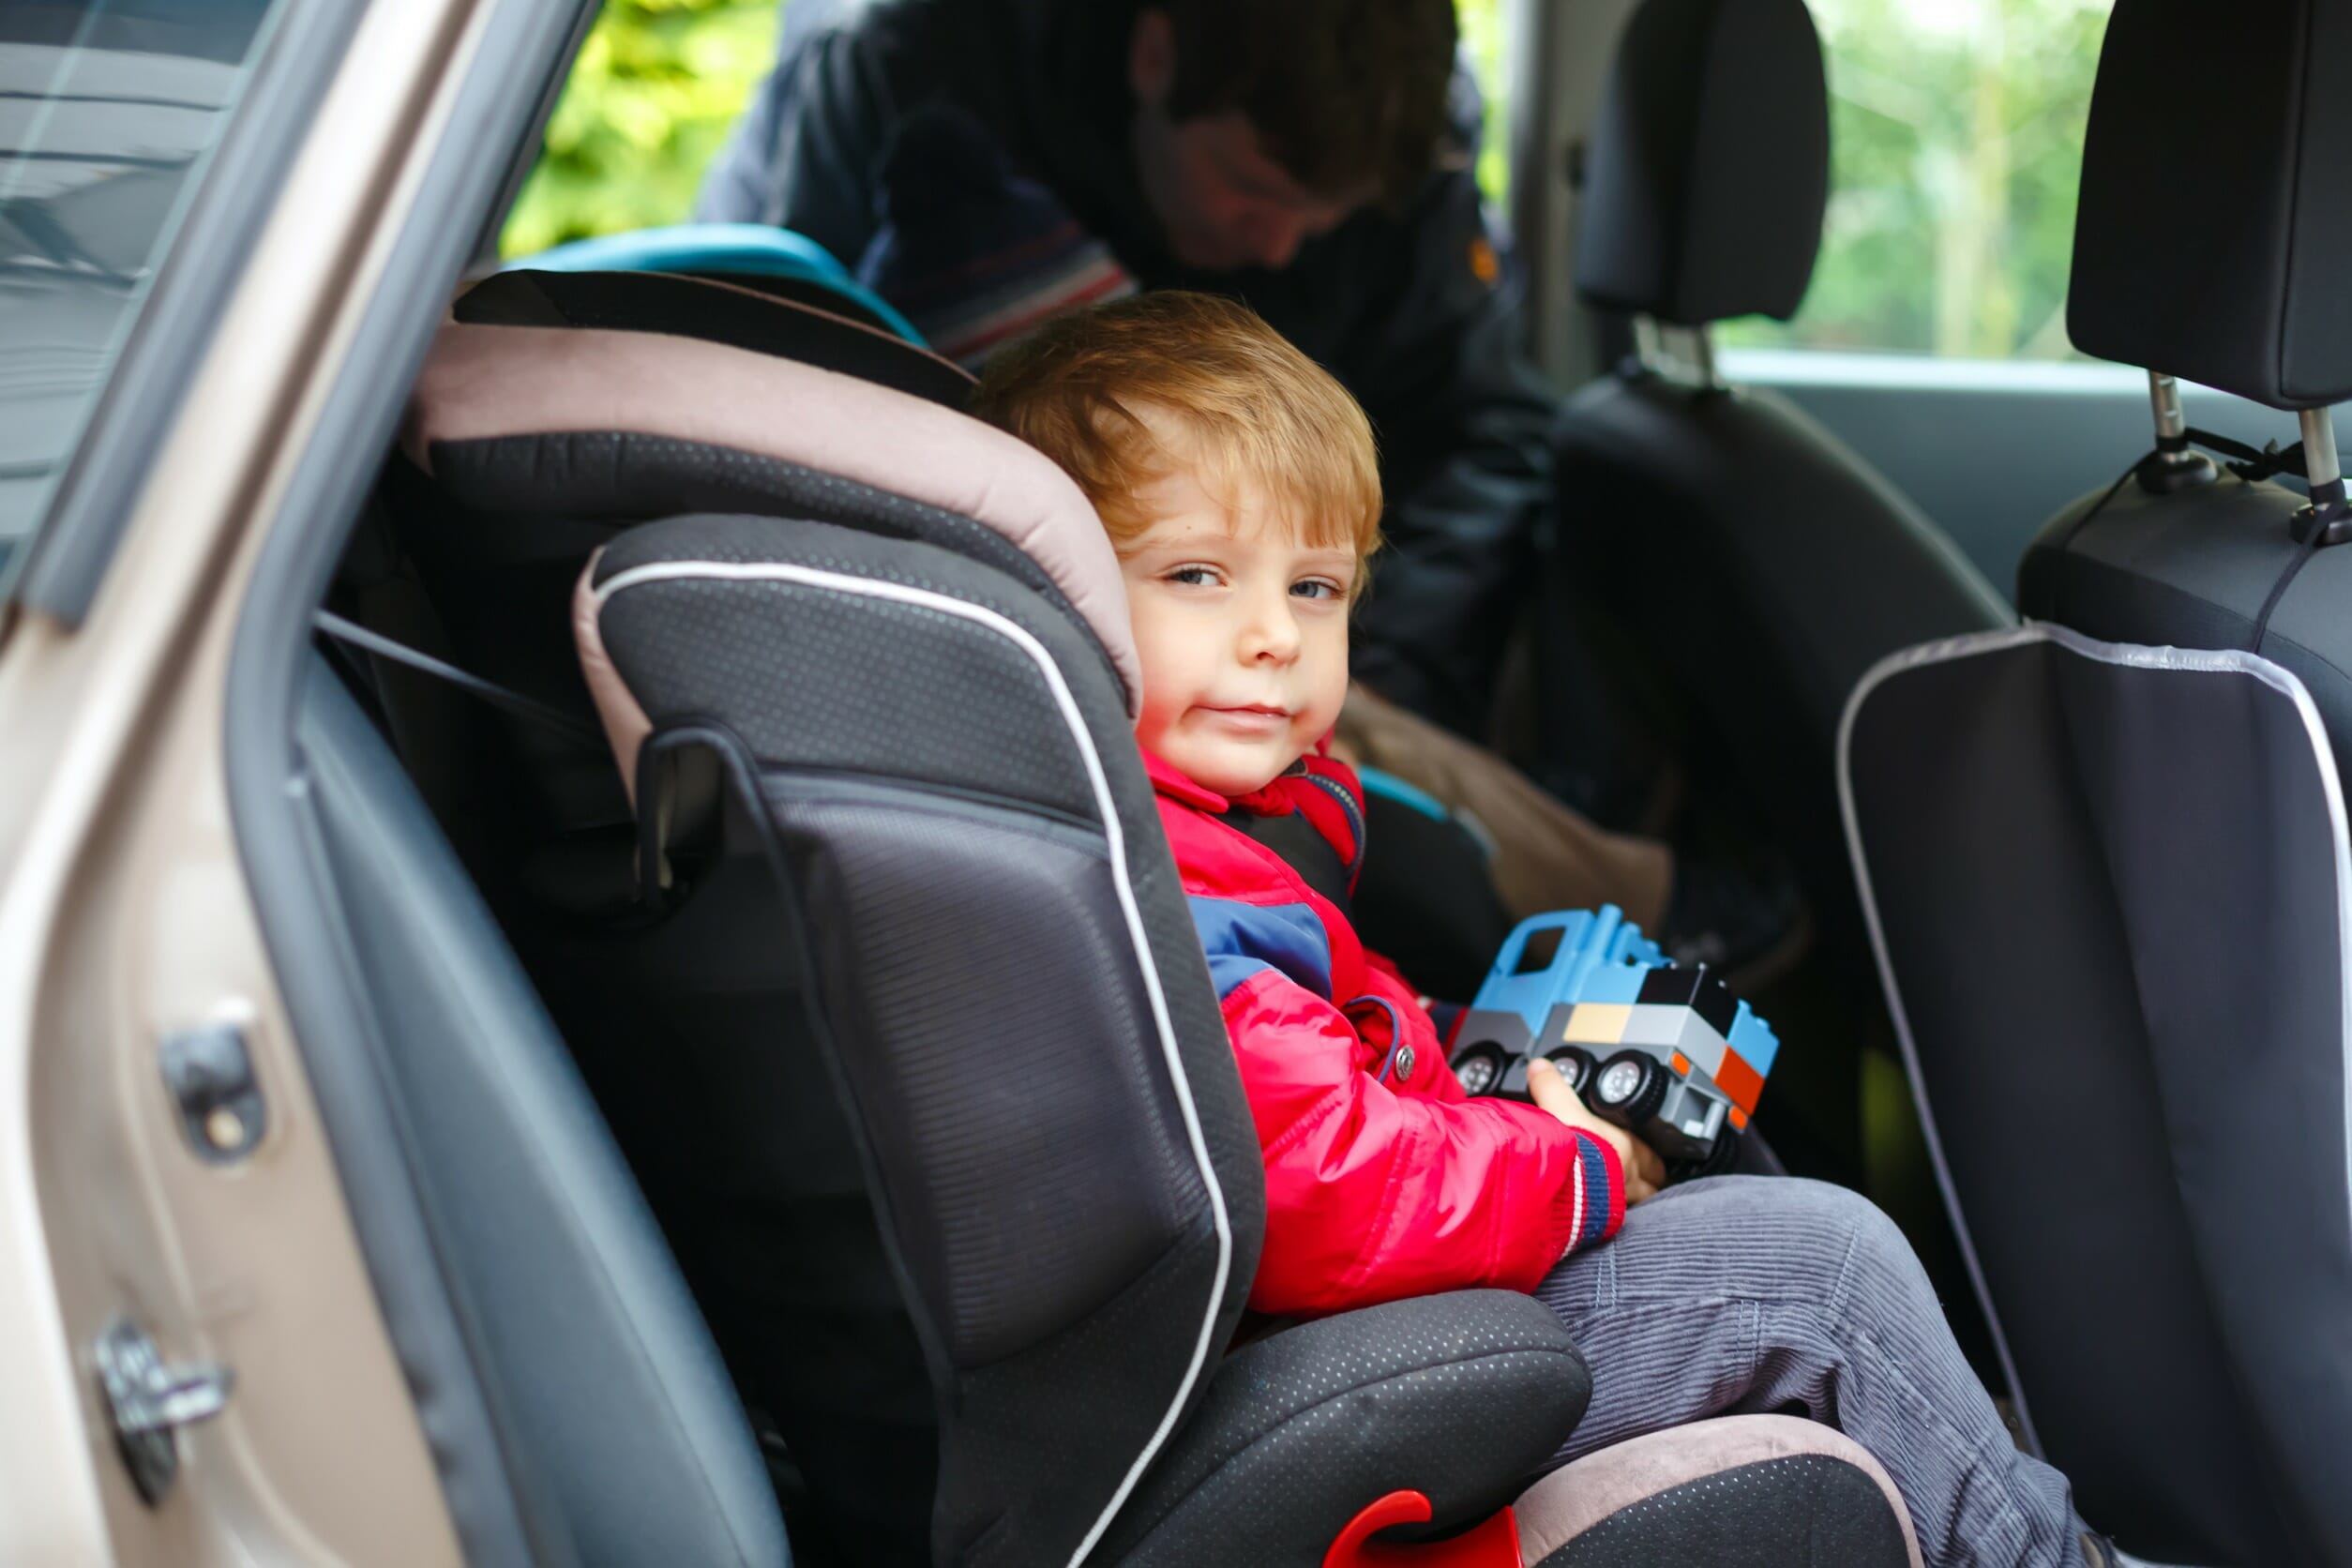 What are the Common Injuries for Children in a Car Accident?